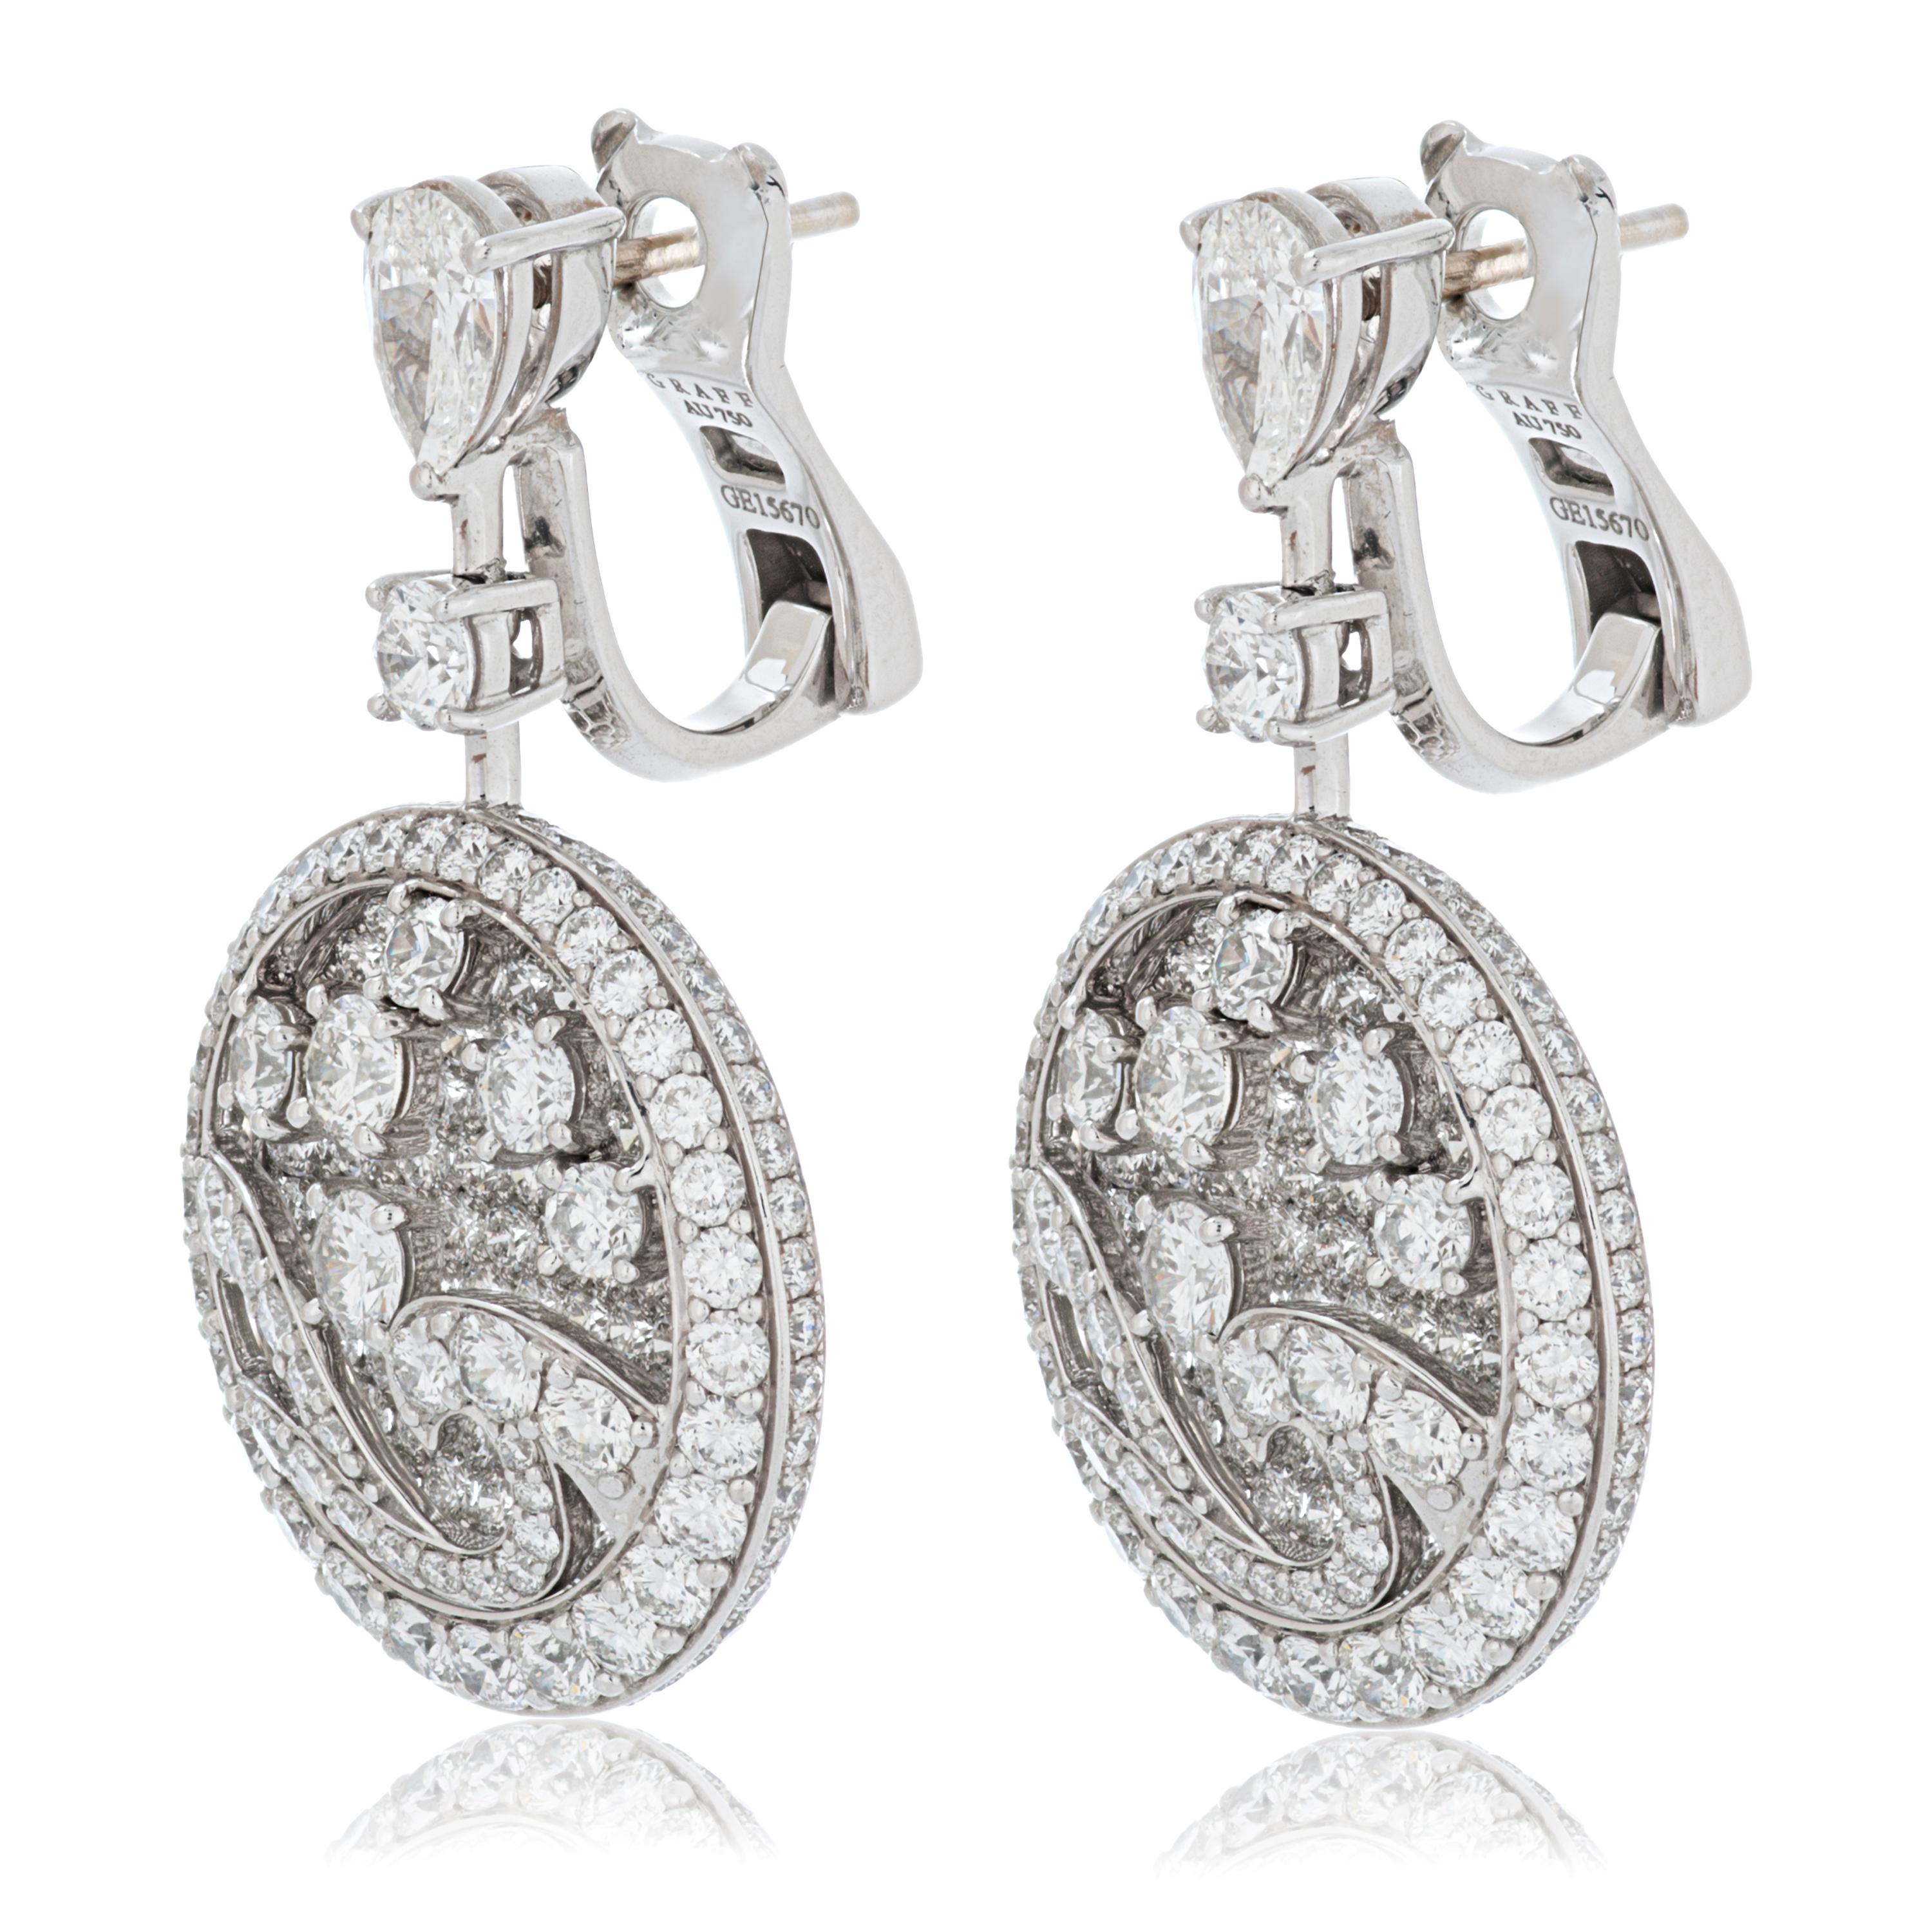 Graff diamond wave earrings in 18k white gold accompanied by Graff box.

These earrings feature a two pear shape diamonds as well as 390 round brilliant cut diamonds totaling approximately 9.93 carats of fine white diamonds with VS+ clarity, all set